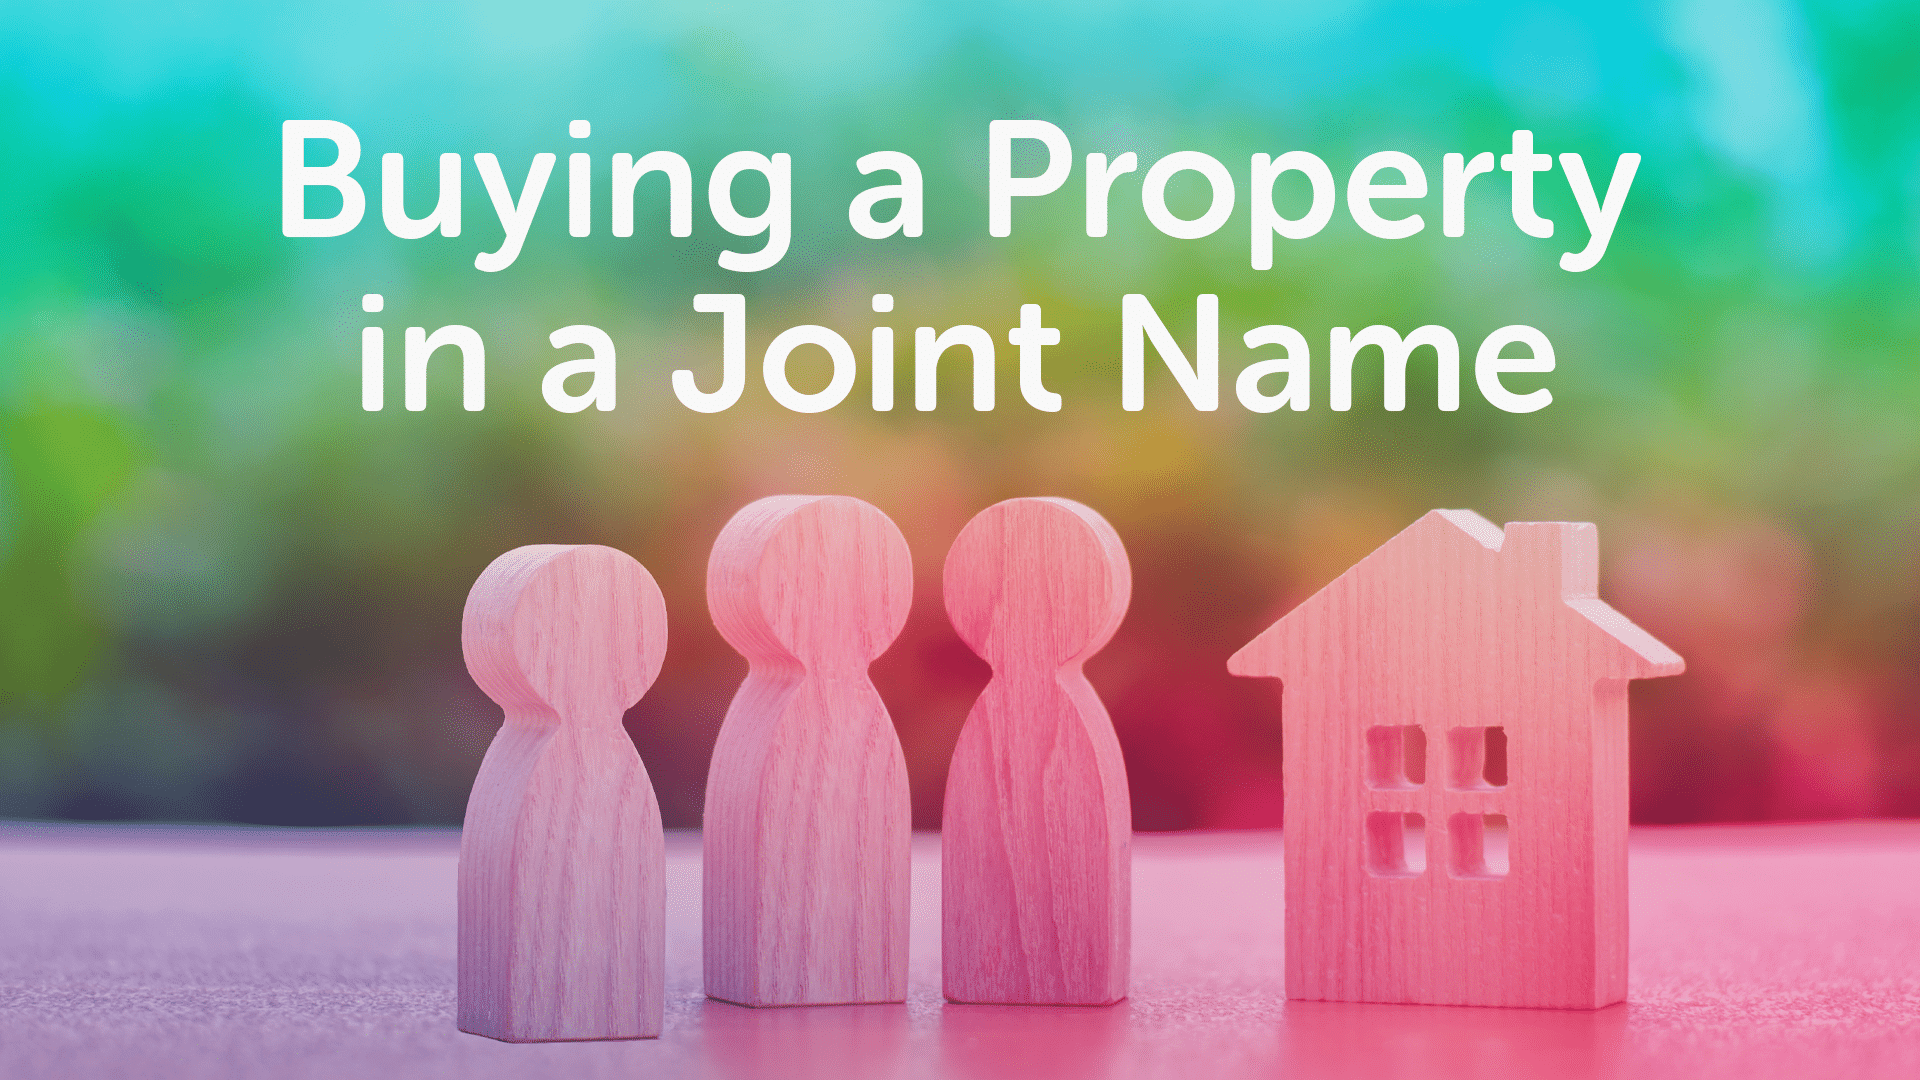 Buying a Property in a Joint Name